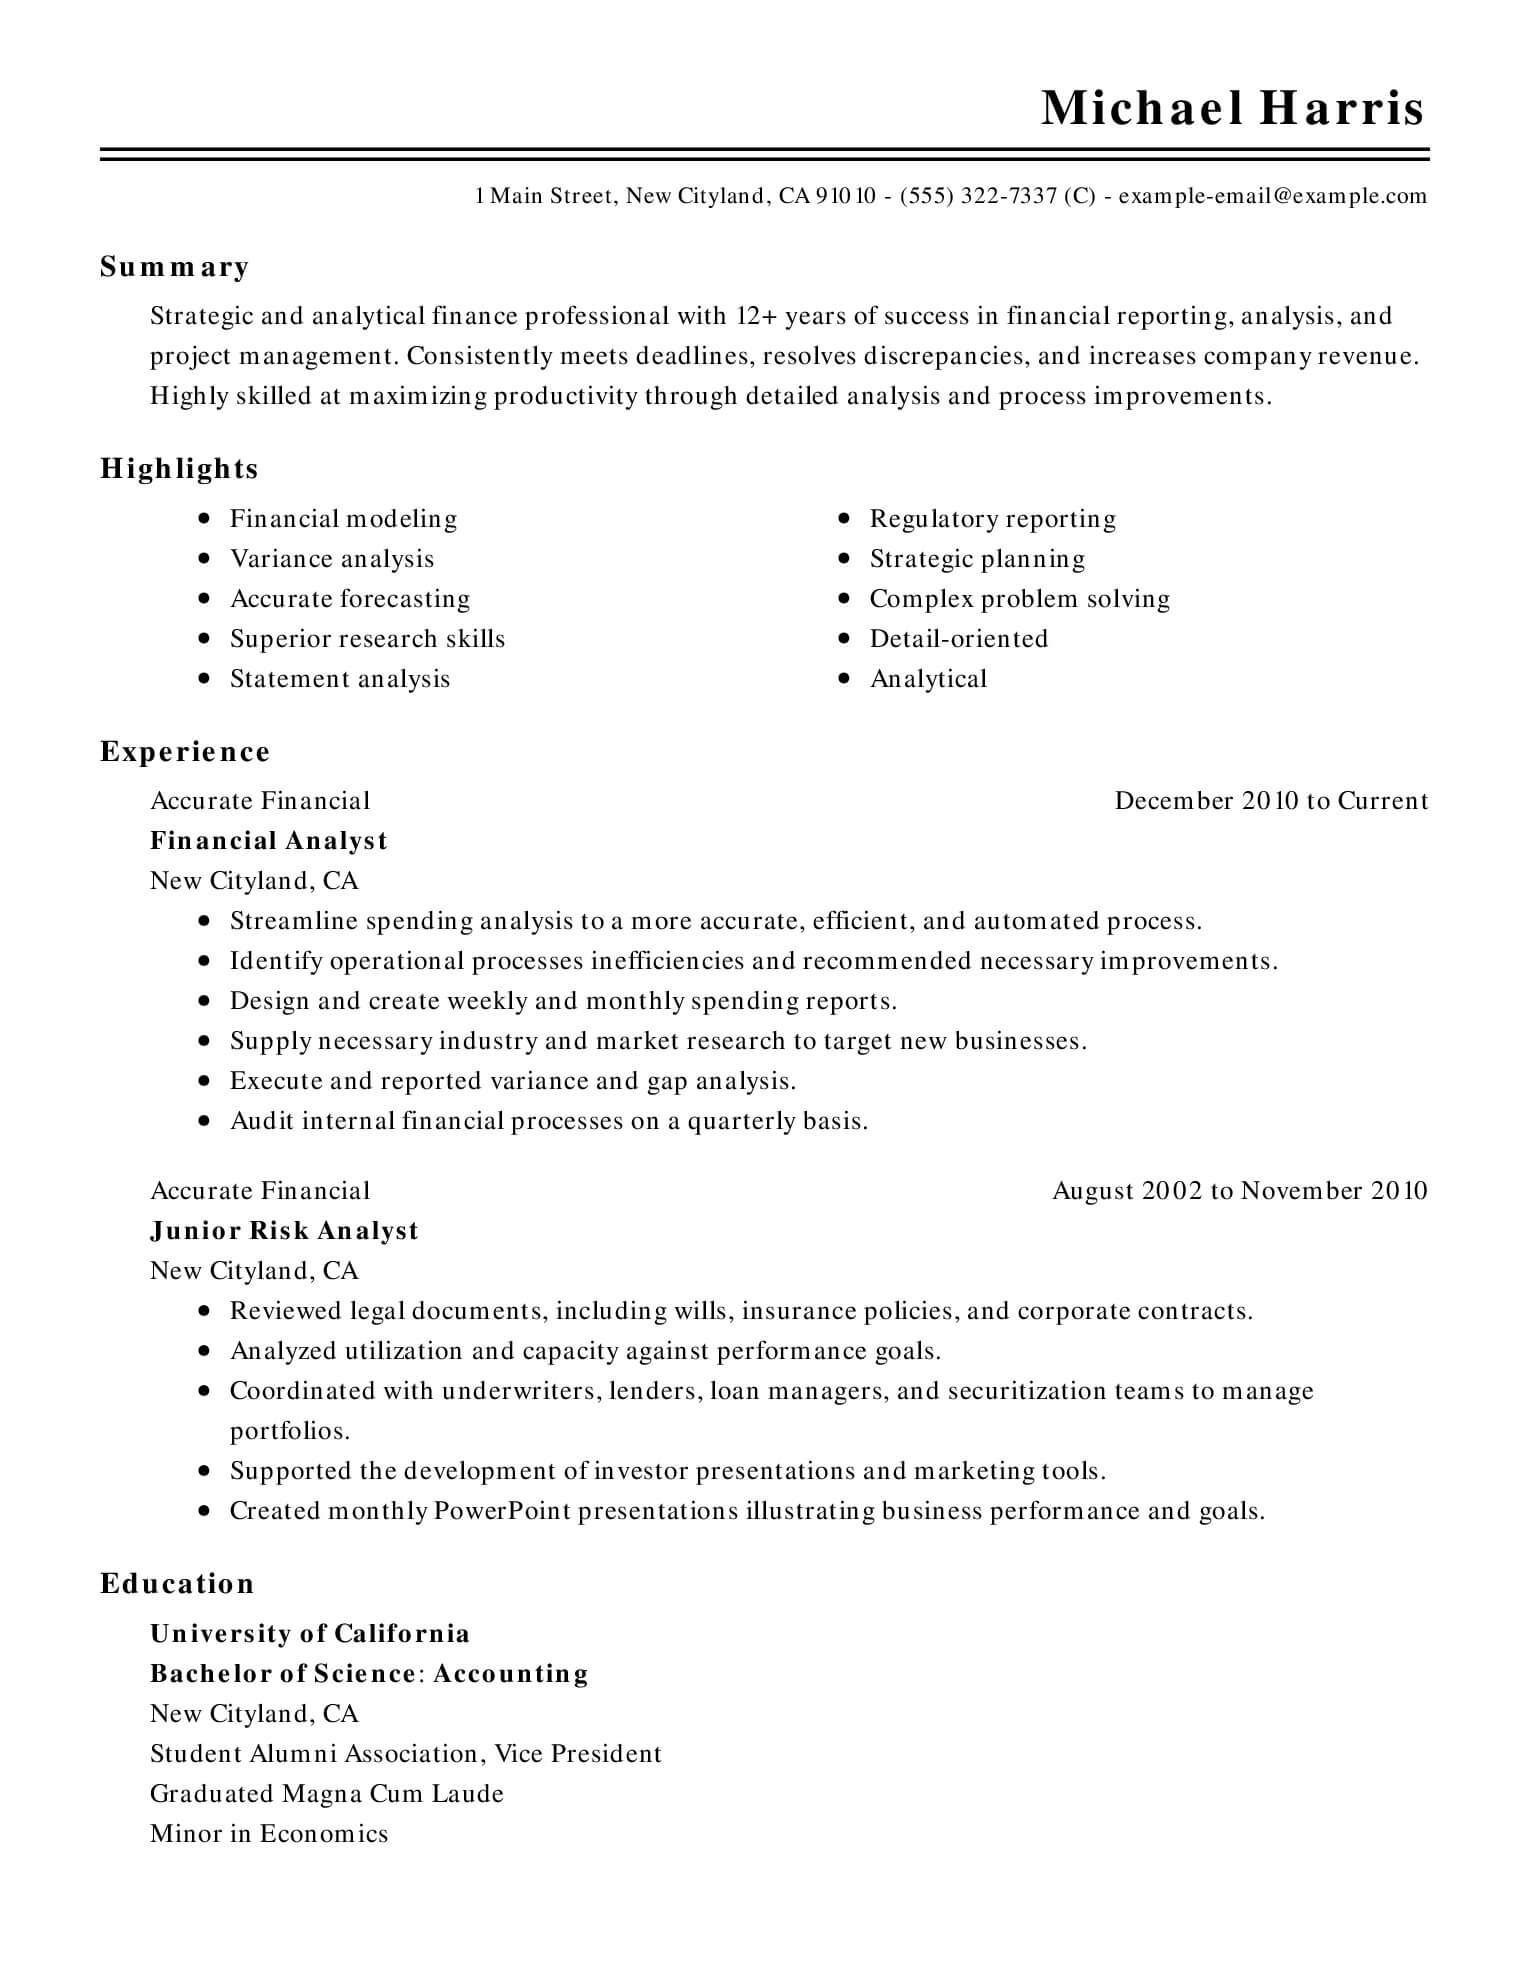 Free Resume Templates Microsoft Word Cv Template Wordo It Resume Ideas Accounting Finance Example Classic Picture Templates With Free Download Document free resume templates microsoft word|wikiresume.com